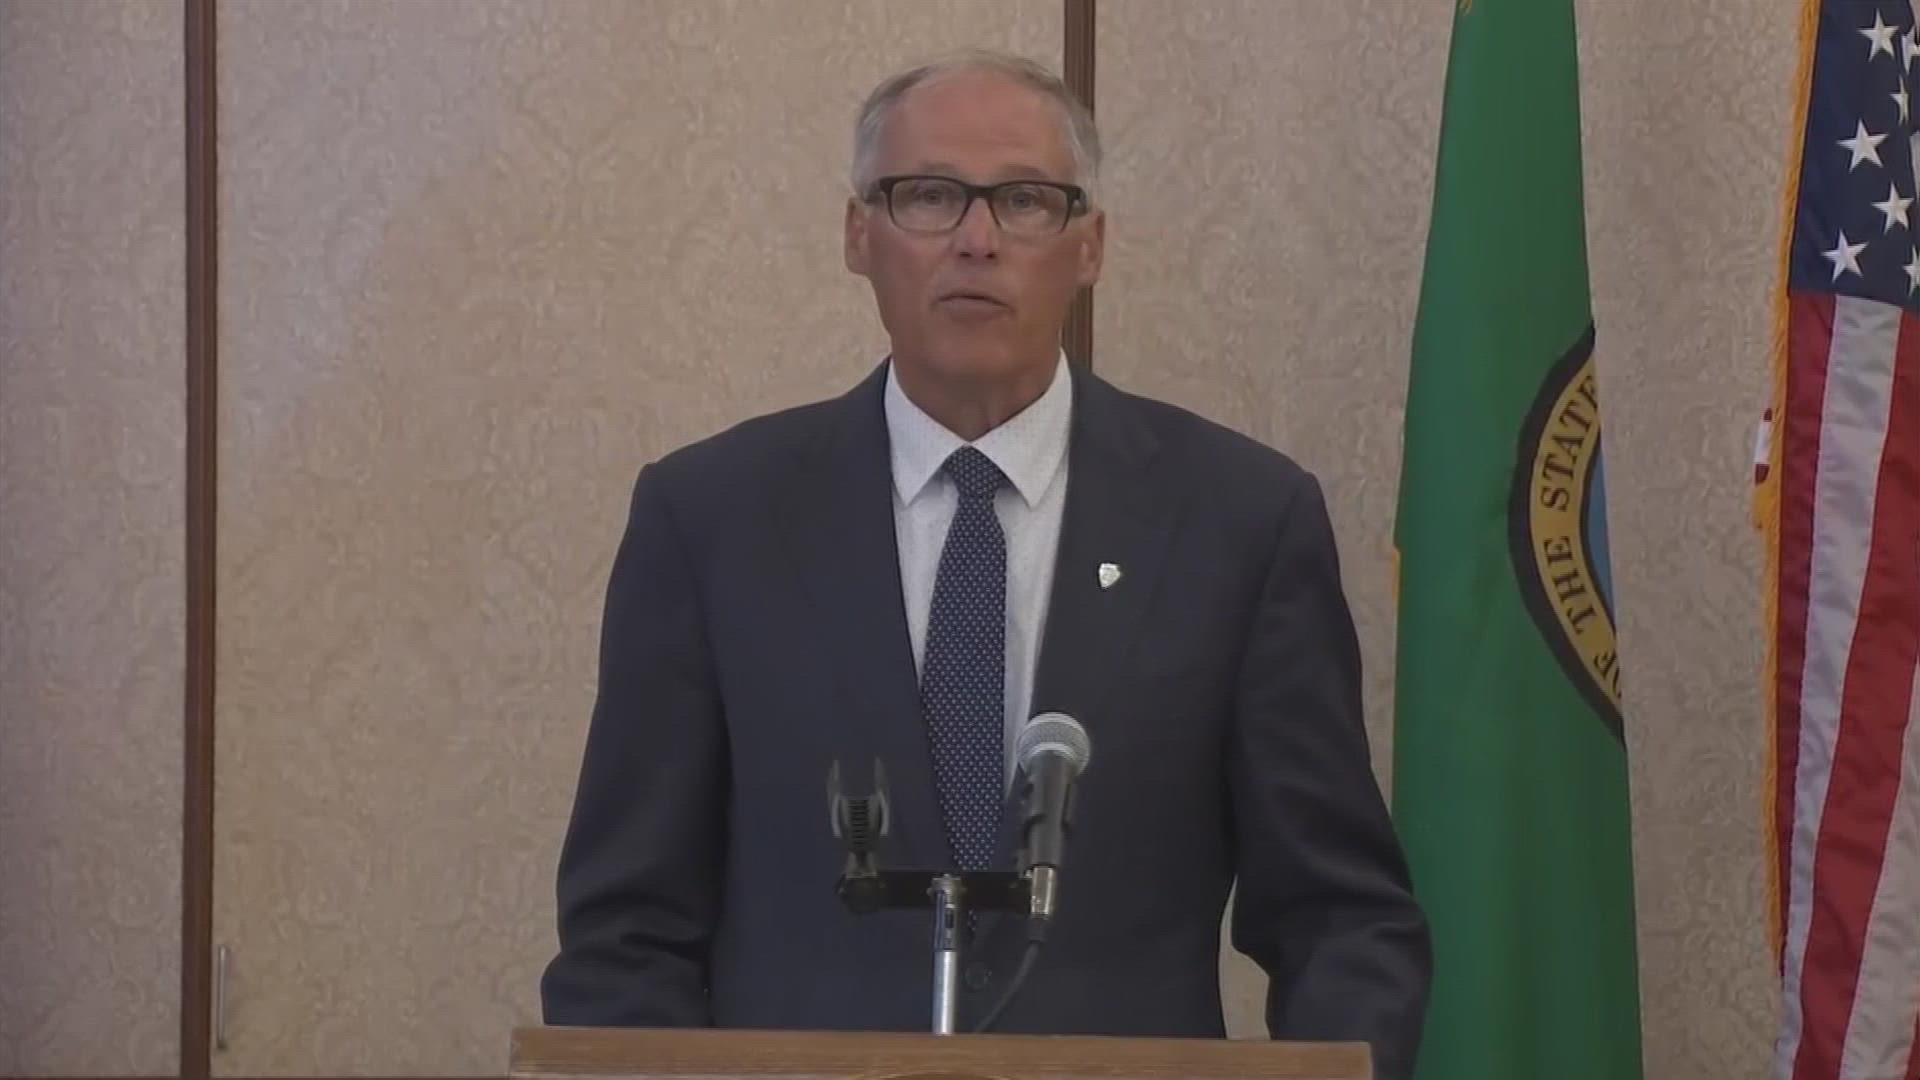 Governor Jay Inslee announced Thursday afternoon that he will end all remaining COVID-19 emergency orders and the state of emergency by the end of October.